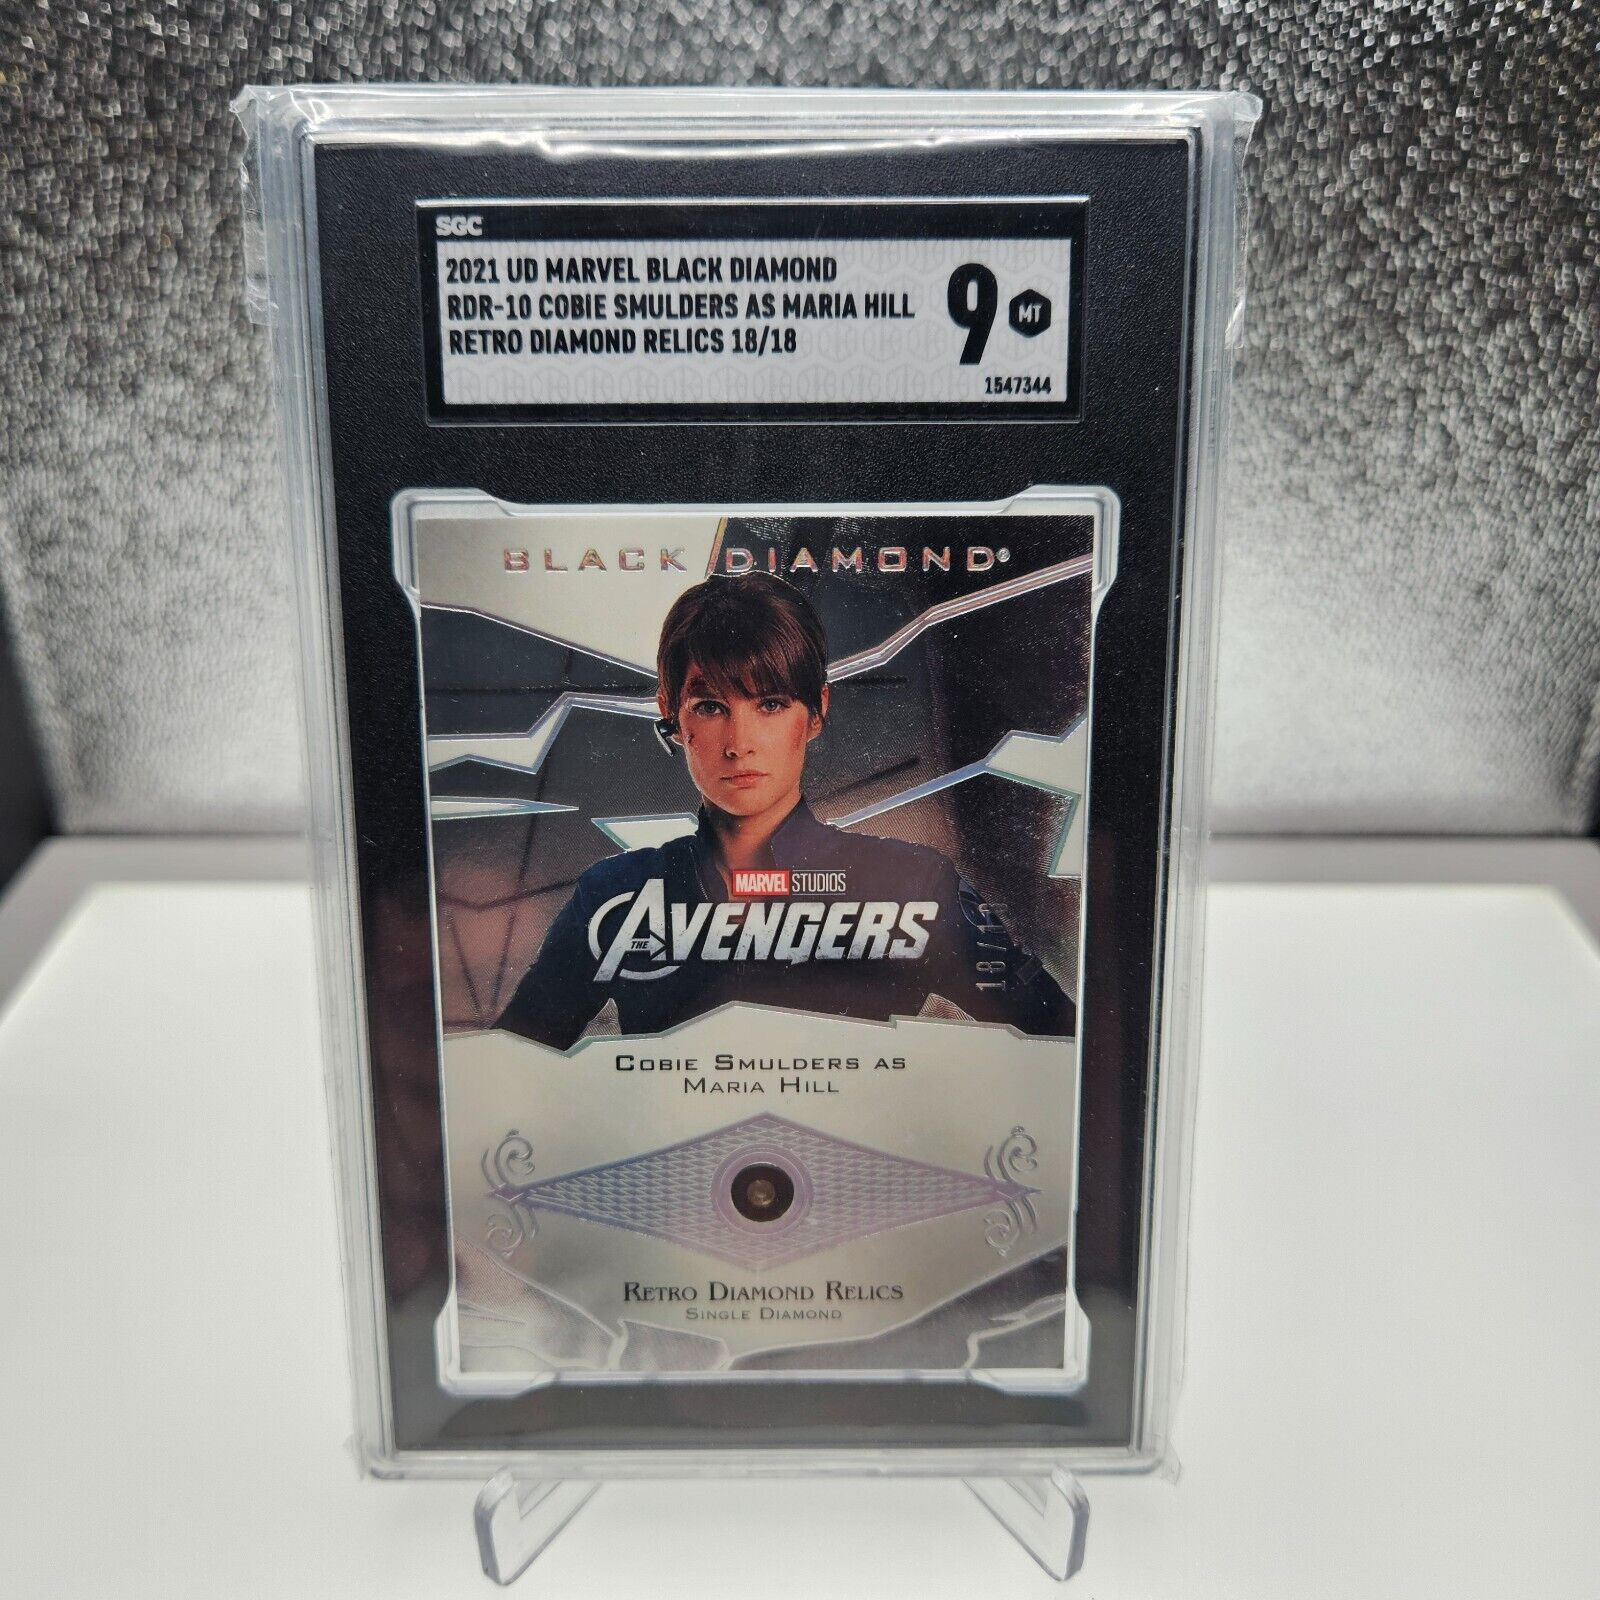 2021 UD Marvel Black Diamond Cobie Smulders as Maria Hill SGC 9 Relic Card OMEGA